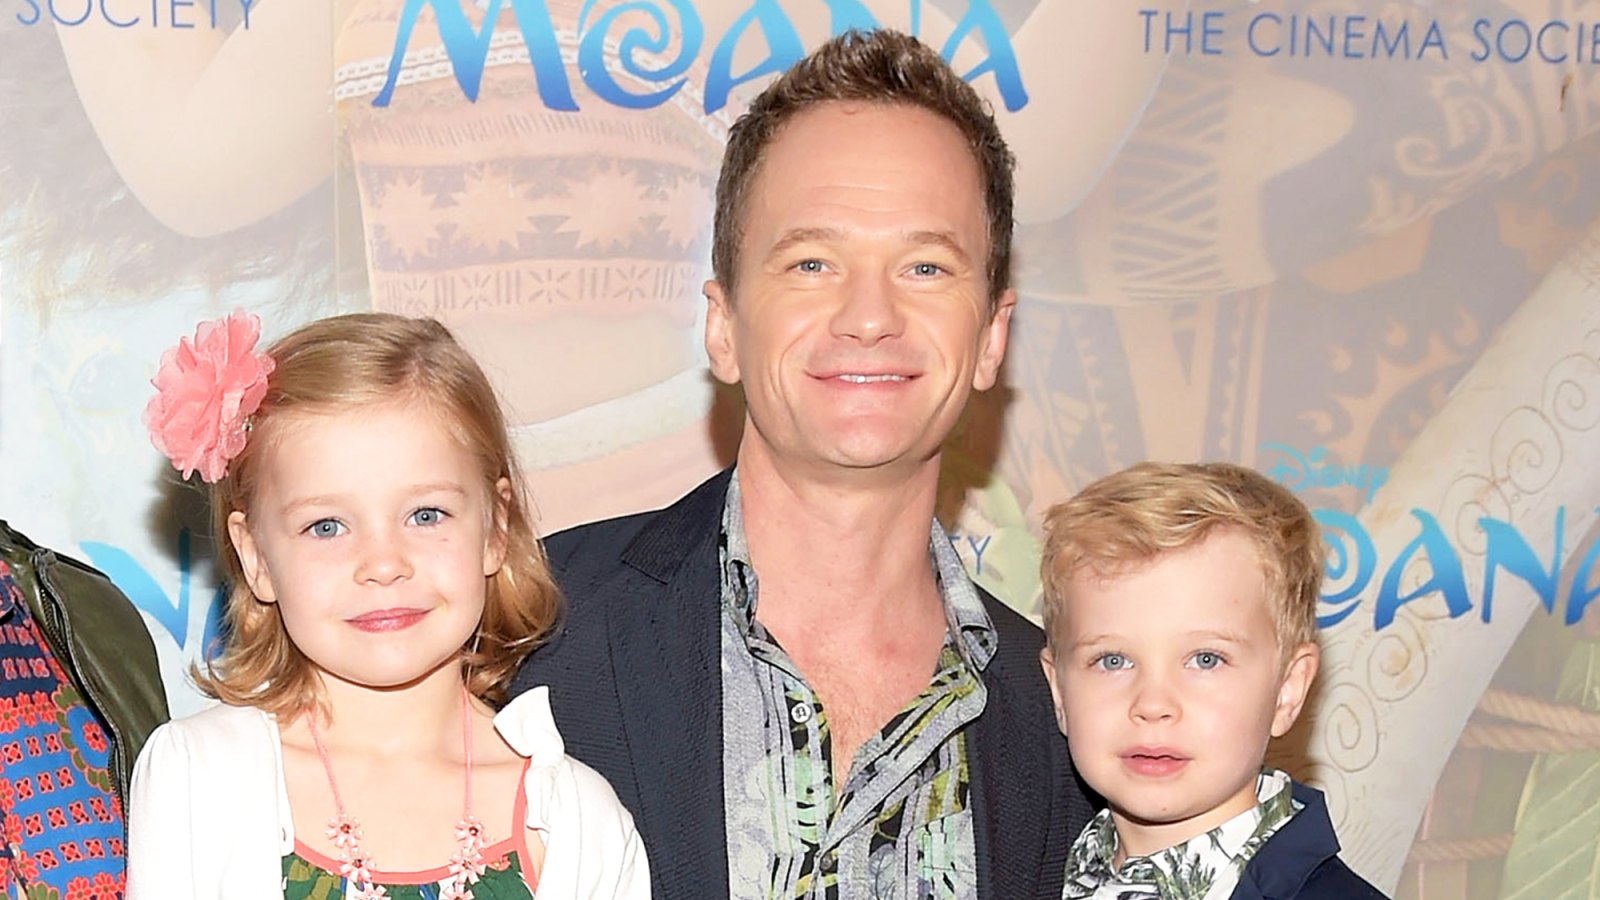 Neil Patrick Harris with daughter Harper and son Gideon attend the 2016 Cinema Society Screening Of "Moana" at Metrograph in New York City.